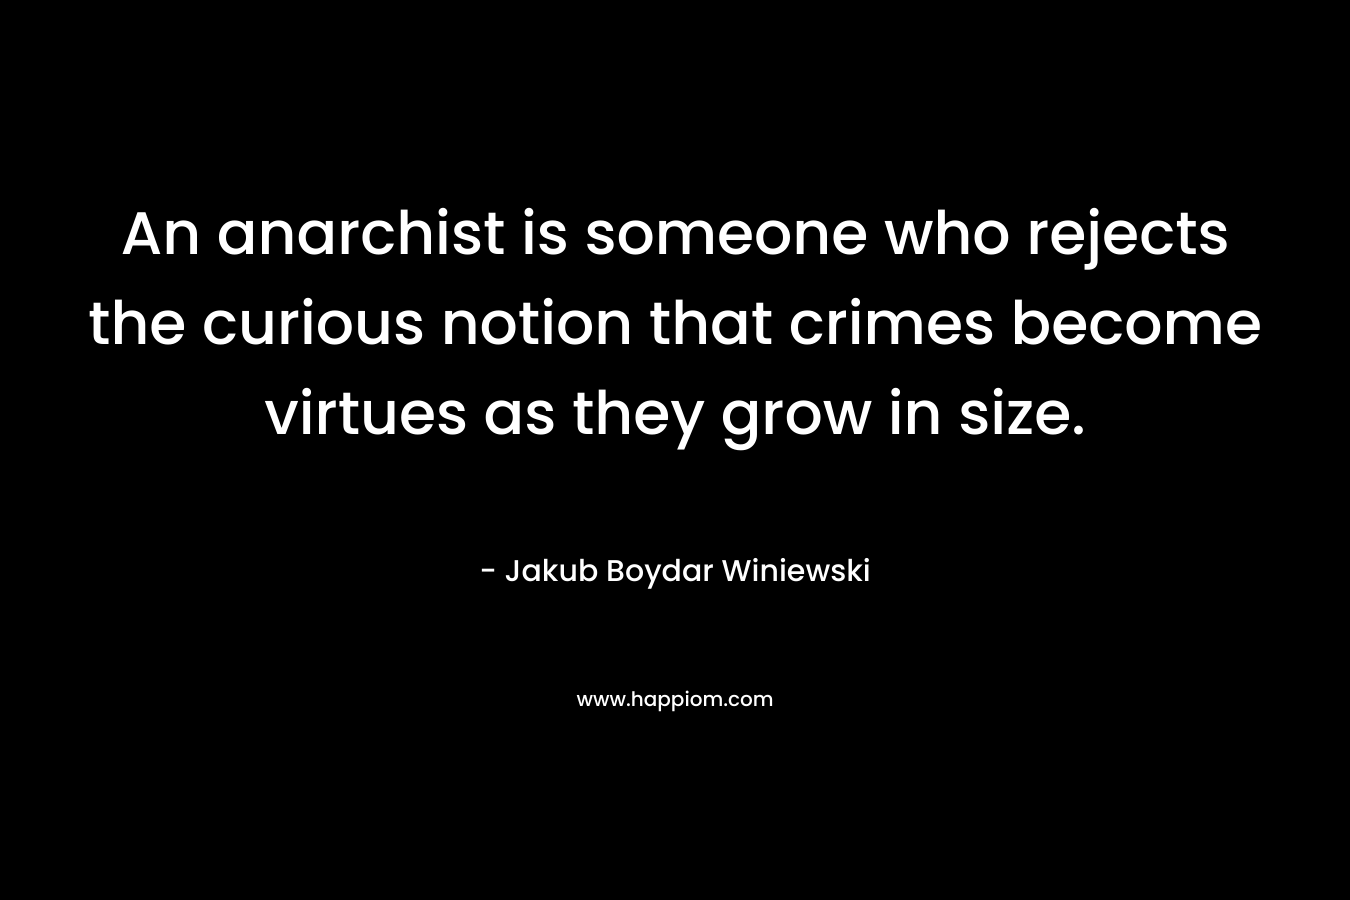 An anarchist is someone who rejects the curious notion that crimes become virtues as they grow in size. – Jakub Boydar Winiewski